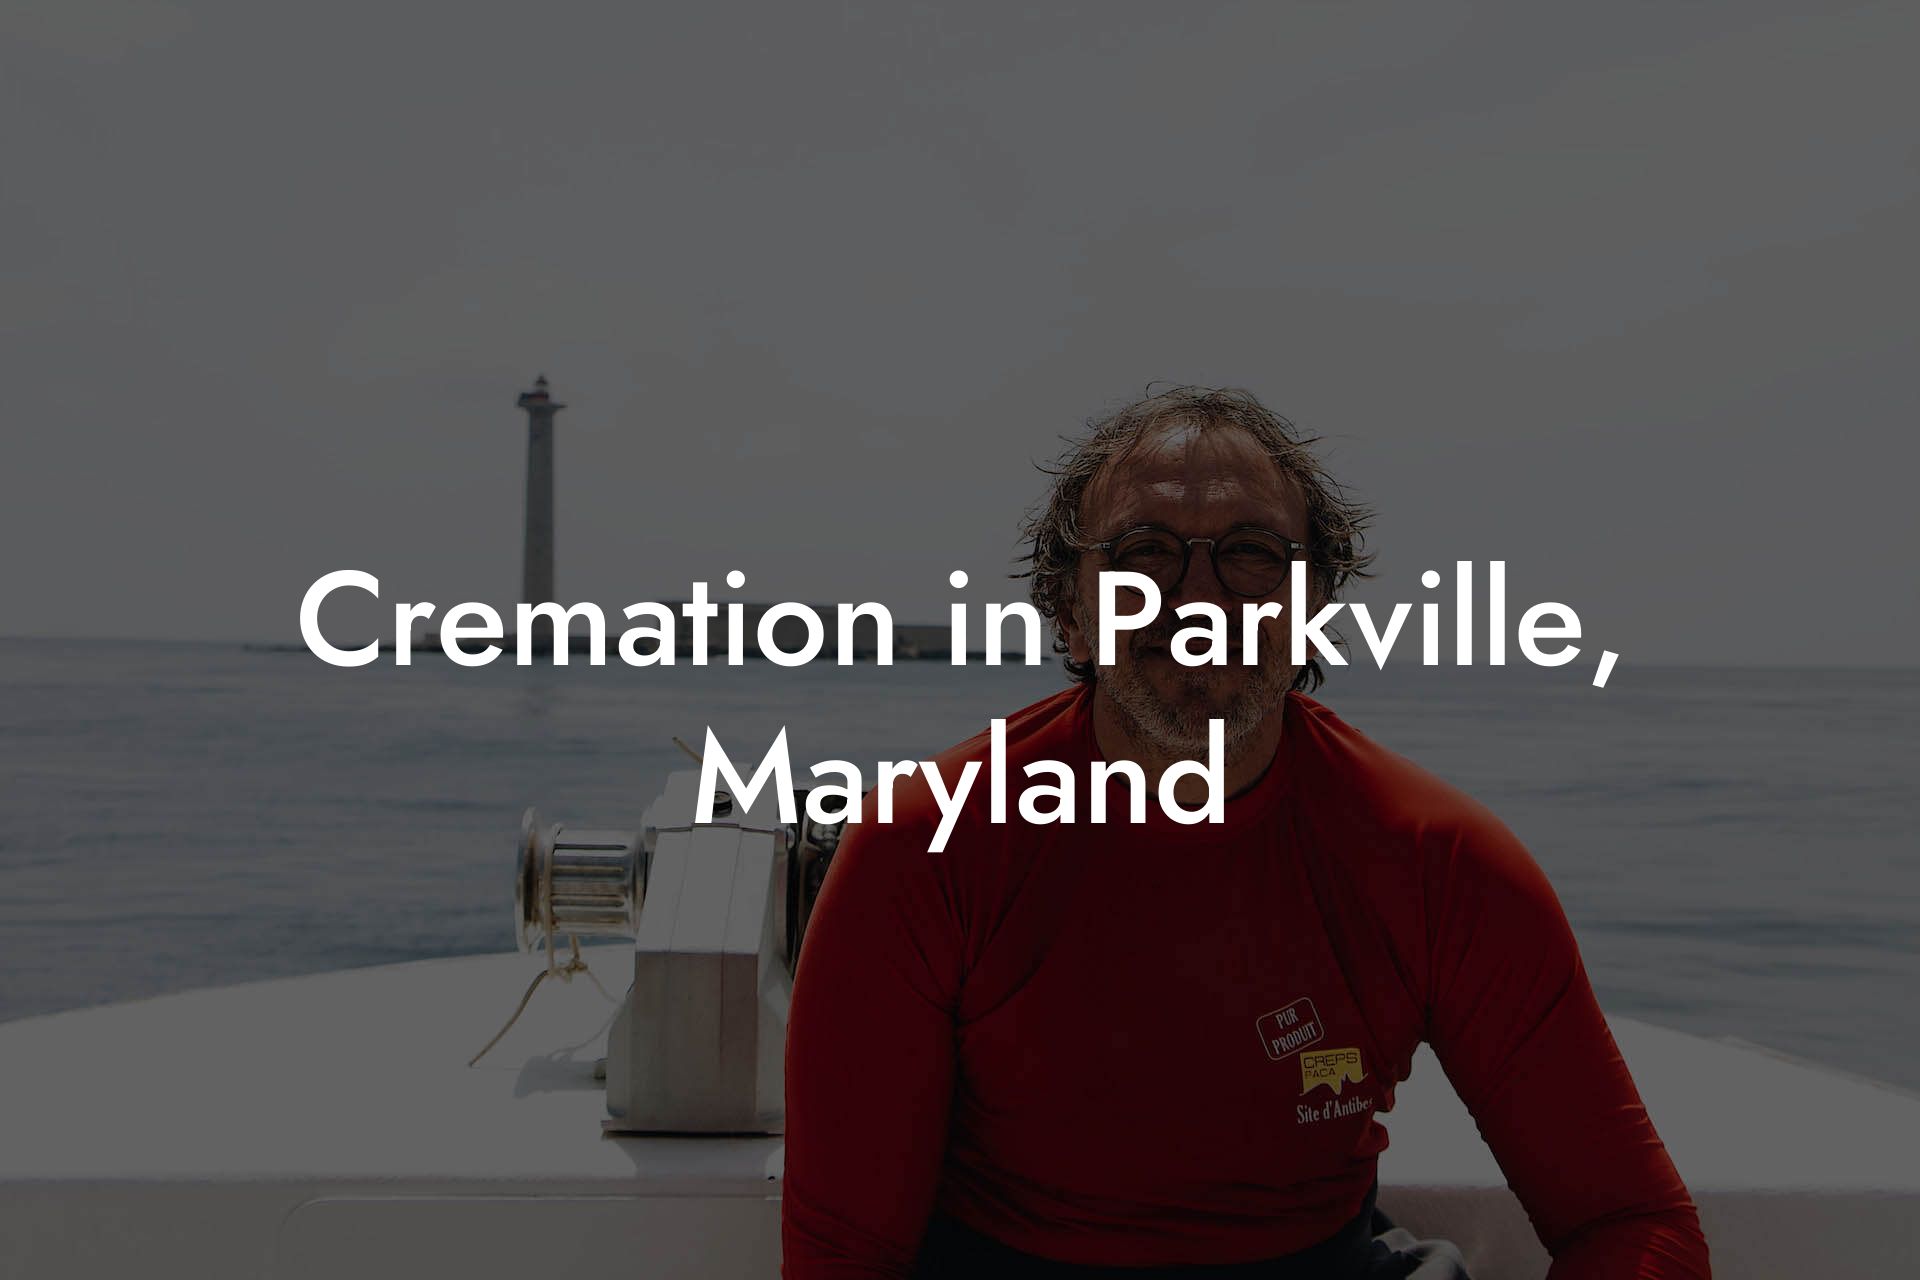 Cremation in Parkville, Maryland